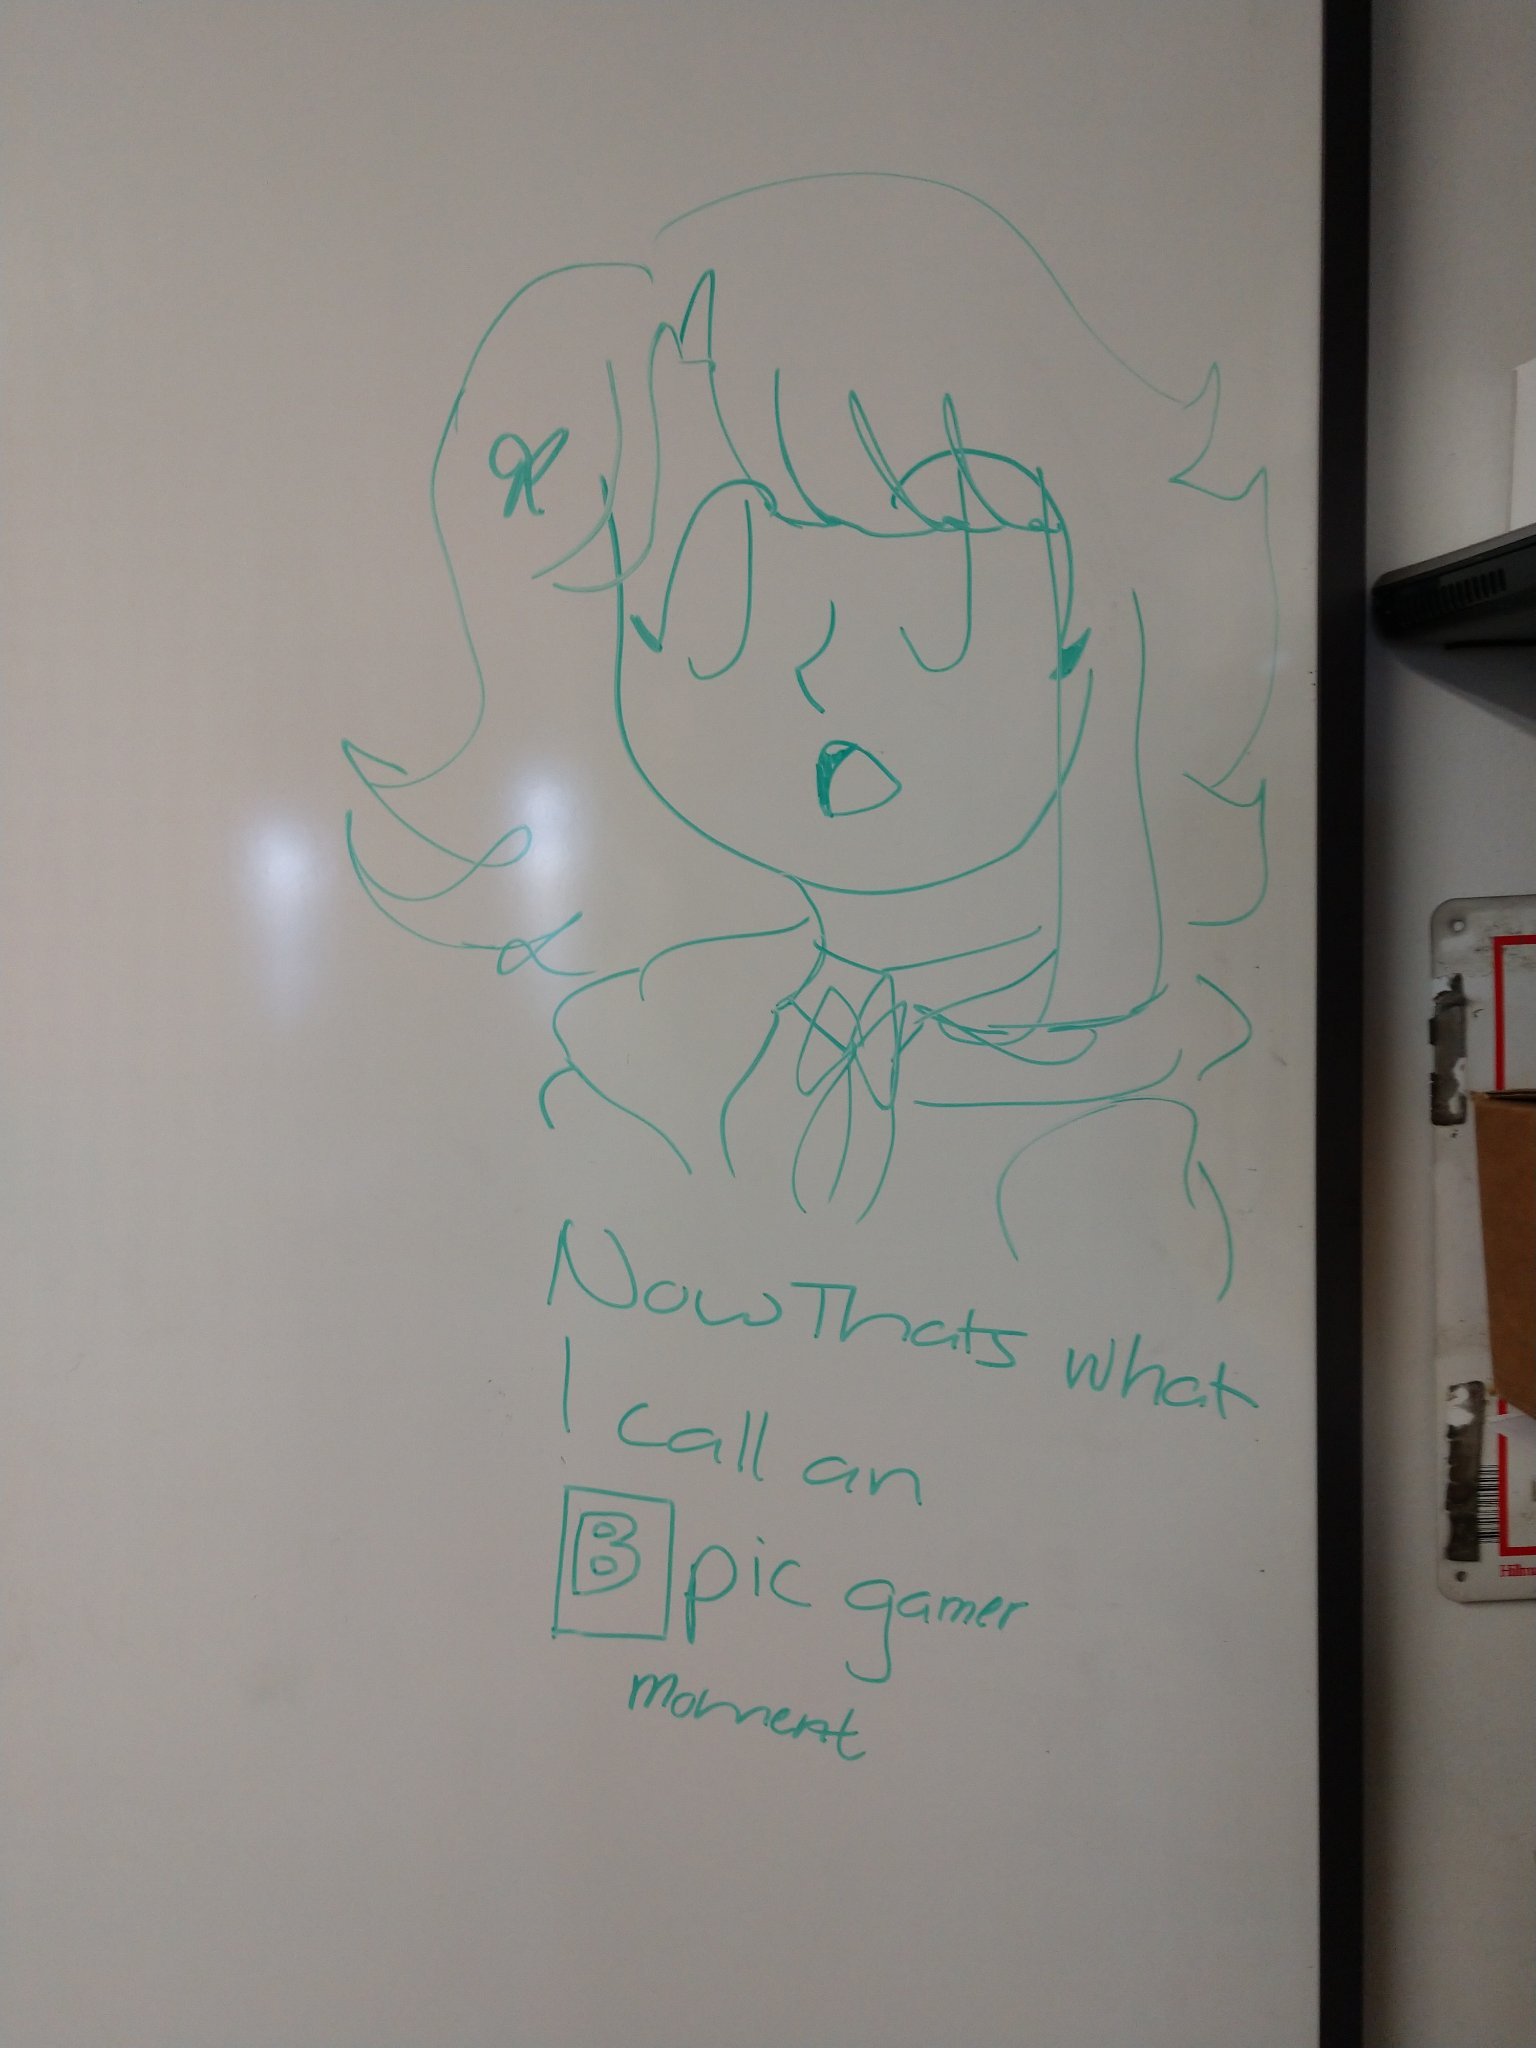 Boss's daughter put this on the white board - meme